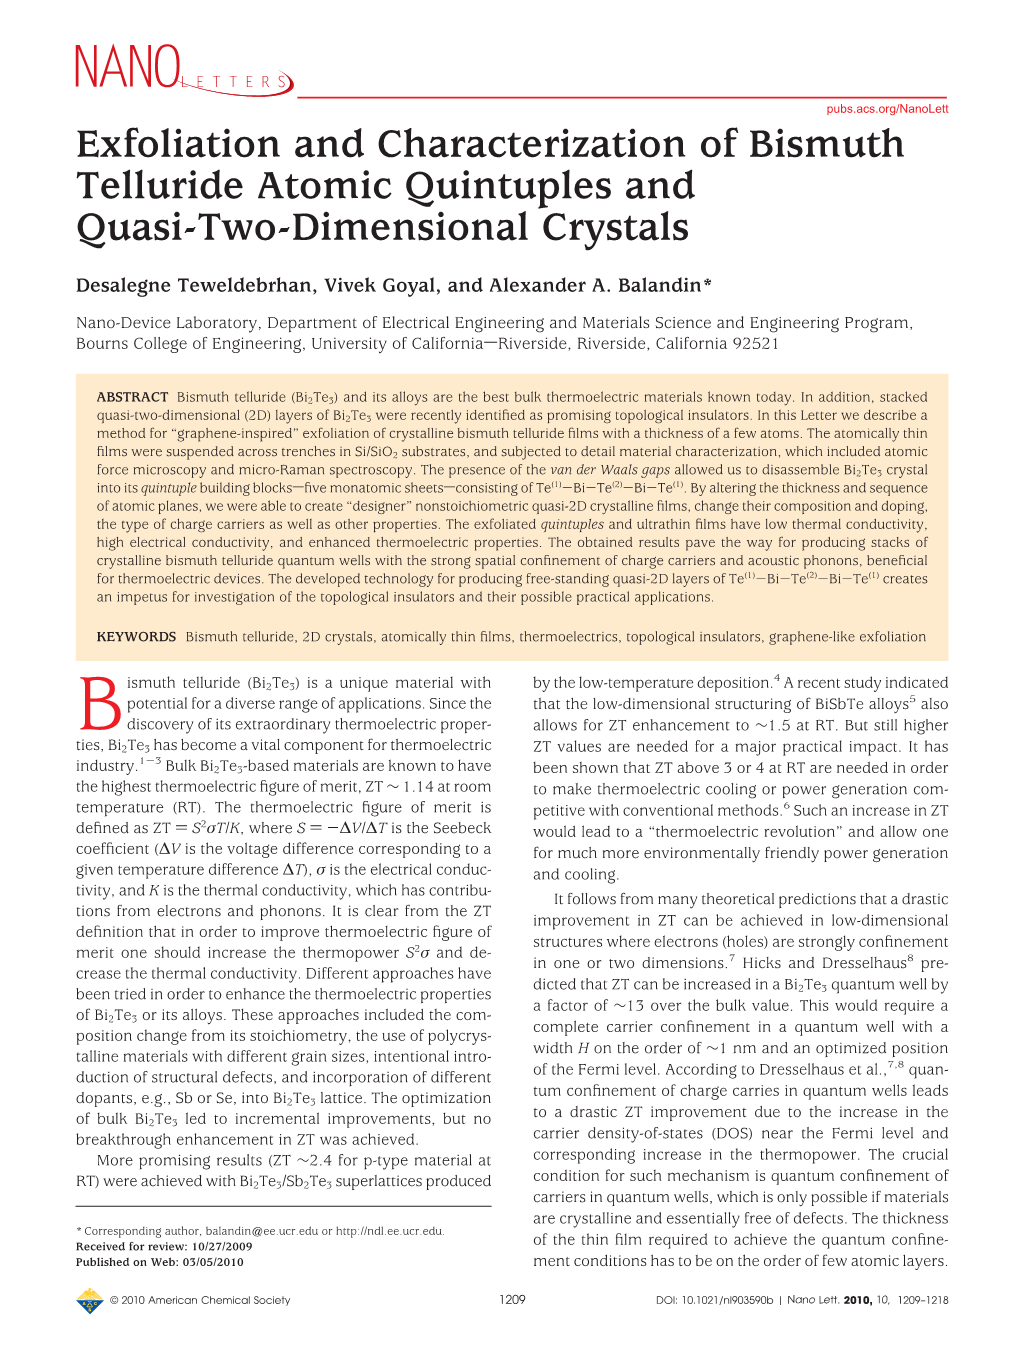 Exfoliation and Characterization of Bismuth Telluride Atomic Quintuples and Quasi-Two-Dimensional Crystals